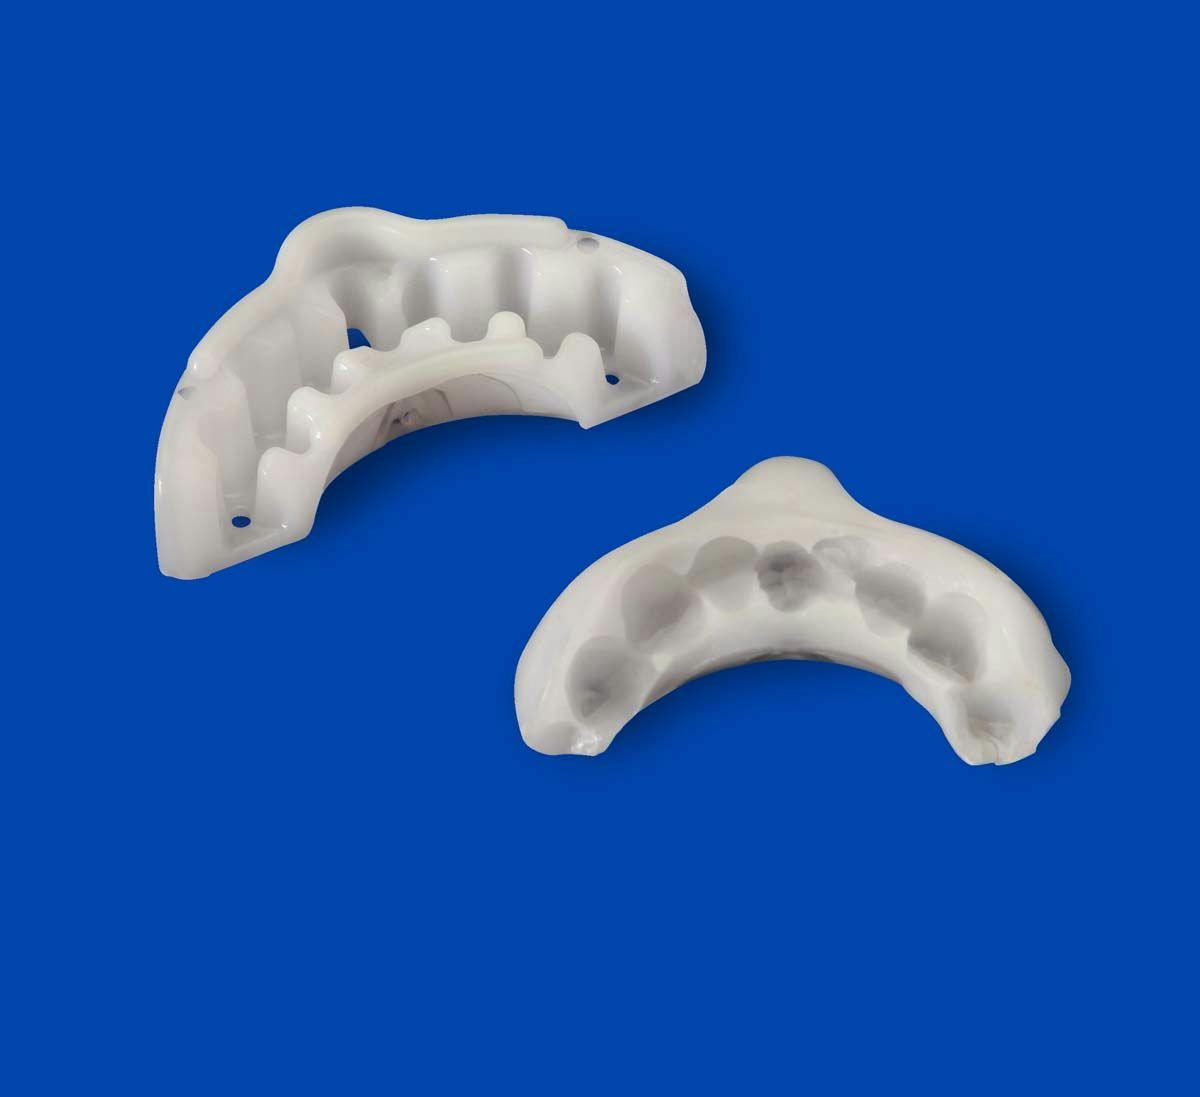 The GrindRelief PRO Bruxism Device